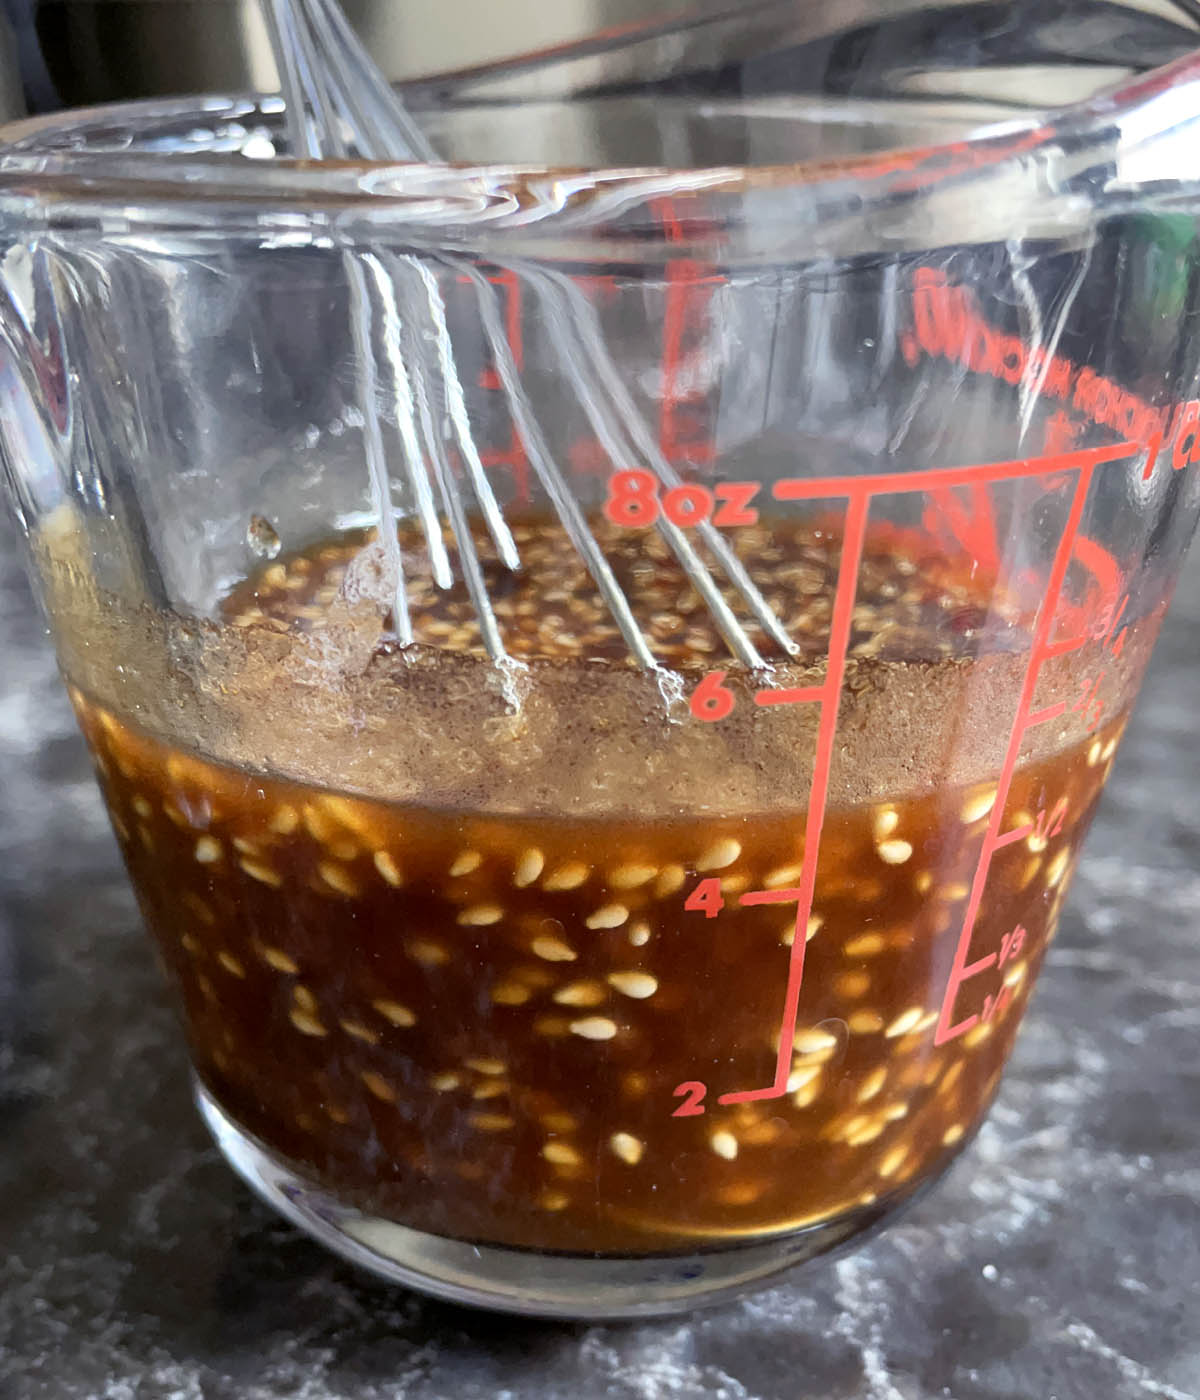 A glass measuring cup containing a thick brown liquid with sesame seeds.